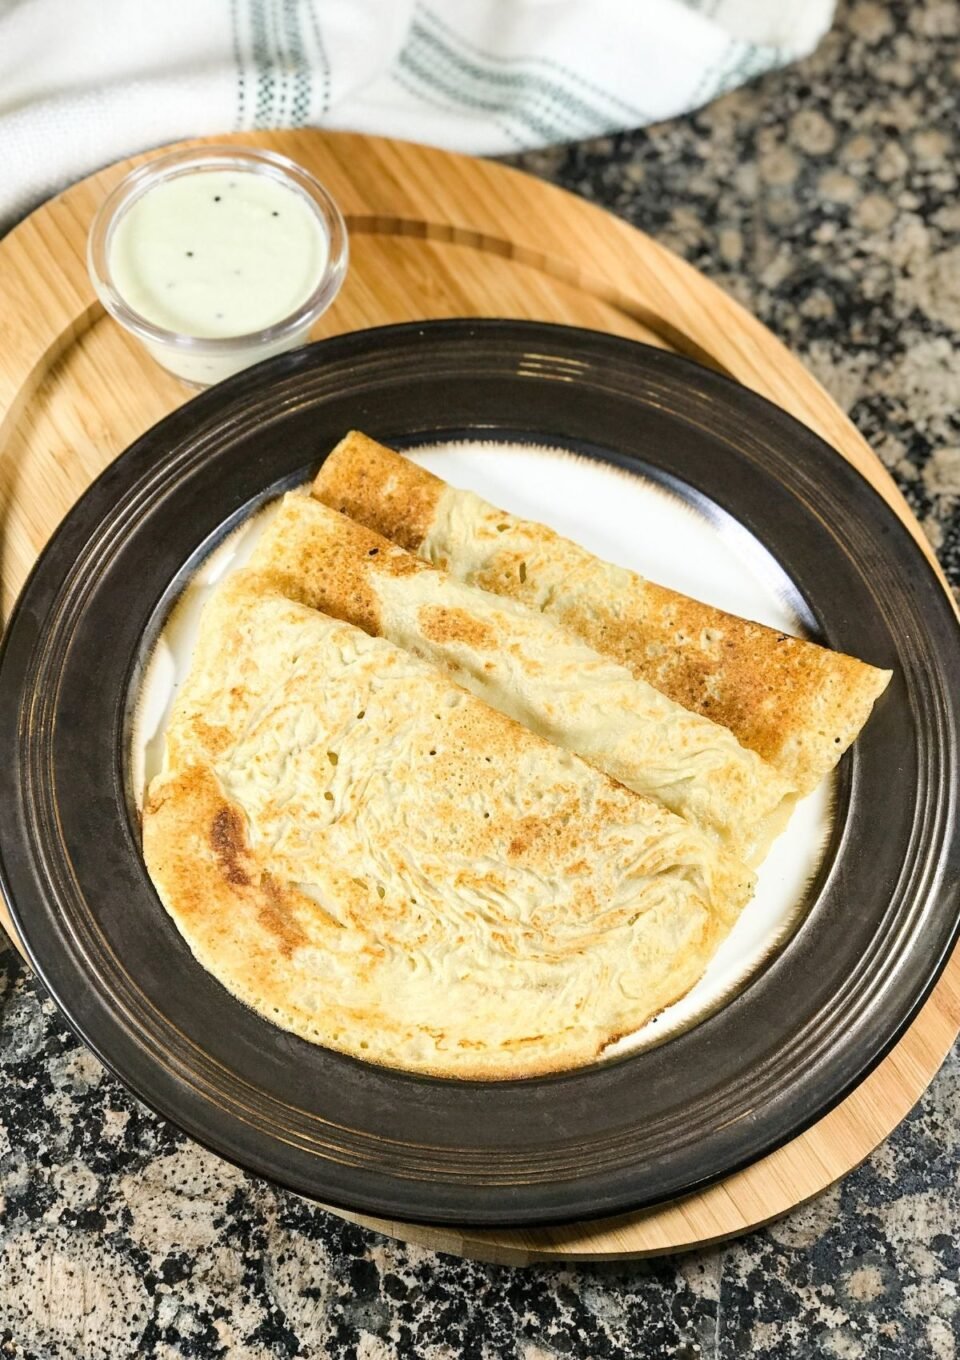 A plate of oats dosa and bowl of chutney is on the serving tray